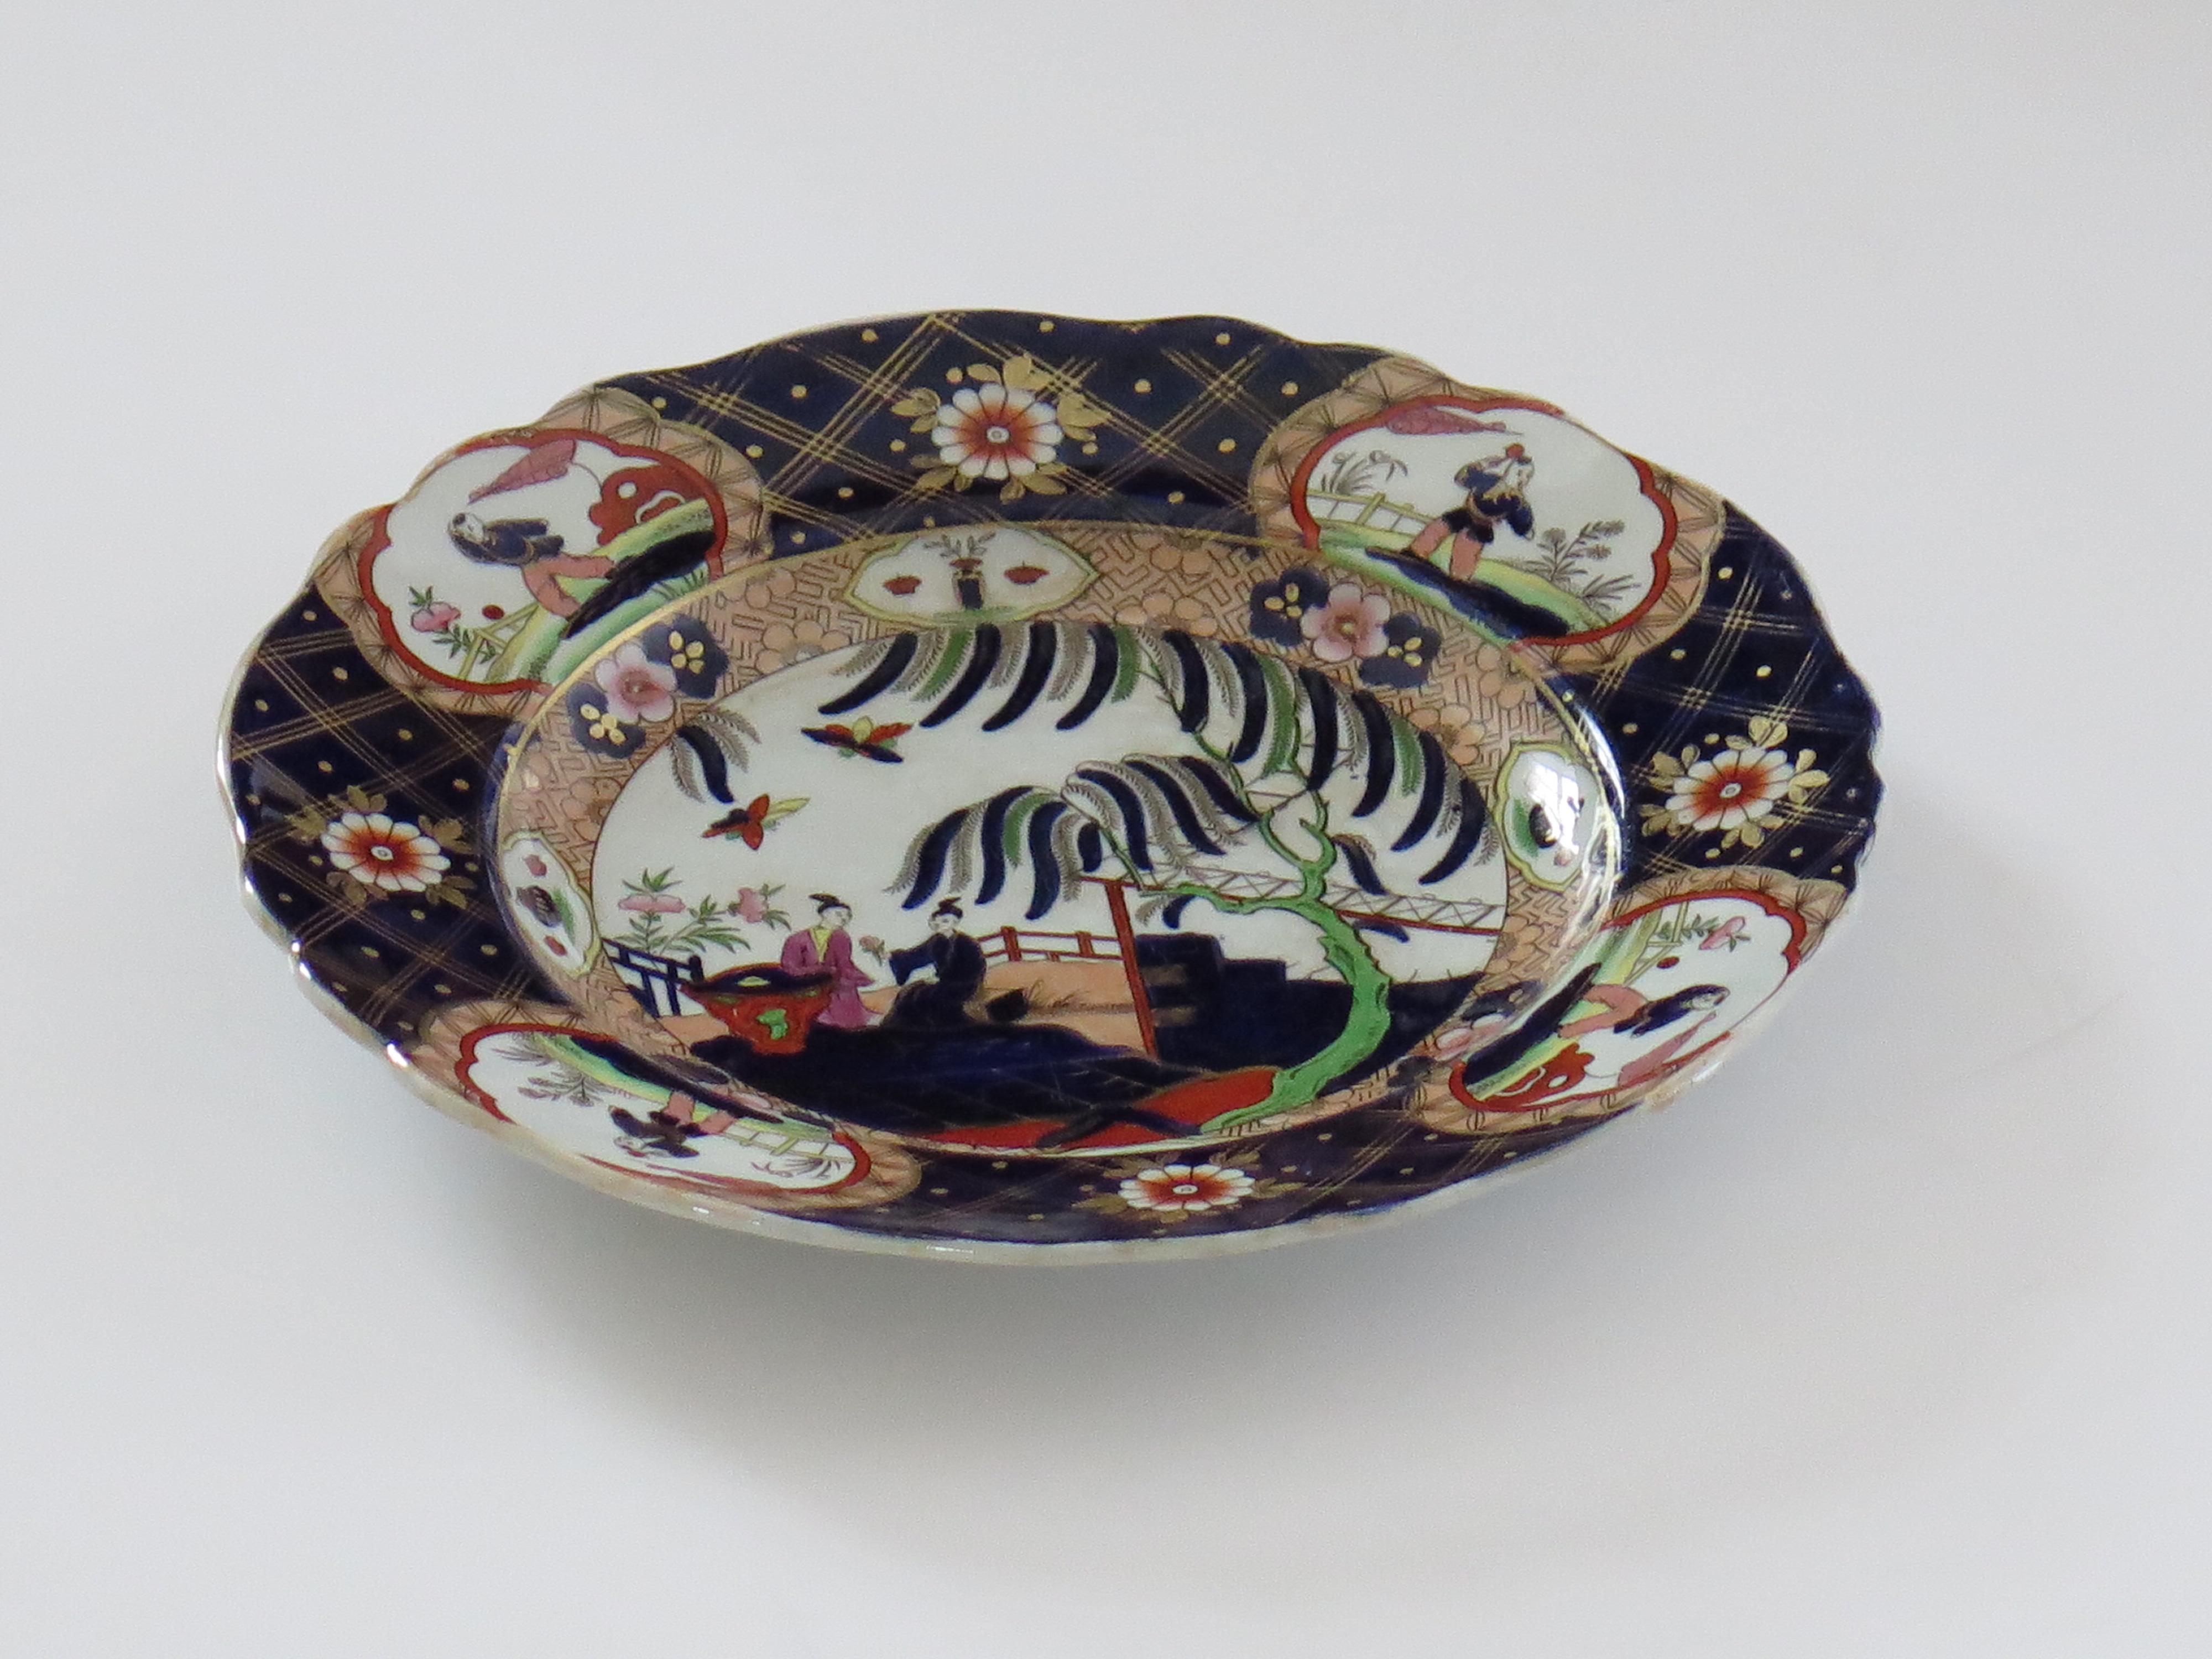 This is a highly decorative, Imperial Stone China (ironstone), plate by John Ridgway, dating to the William IVth period of the 19th century.

The plate is well potted with a wavy rim.

The plate has been carefully hand-painted in bold colorful